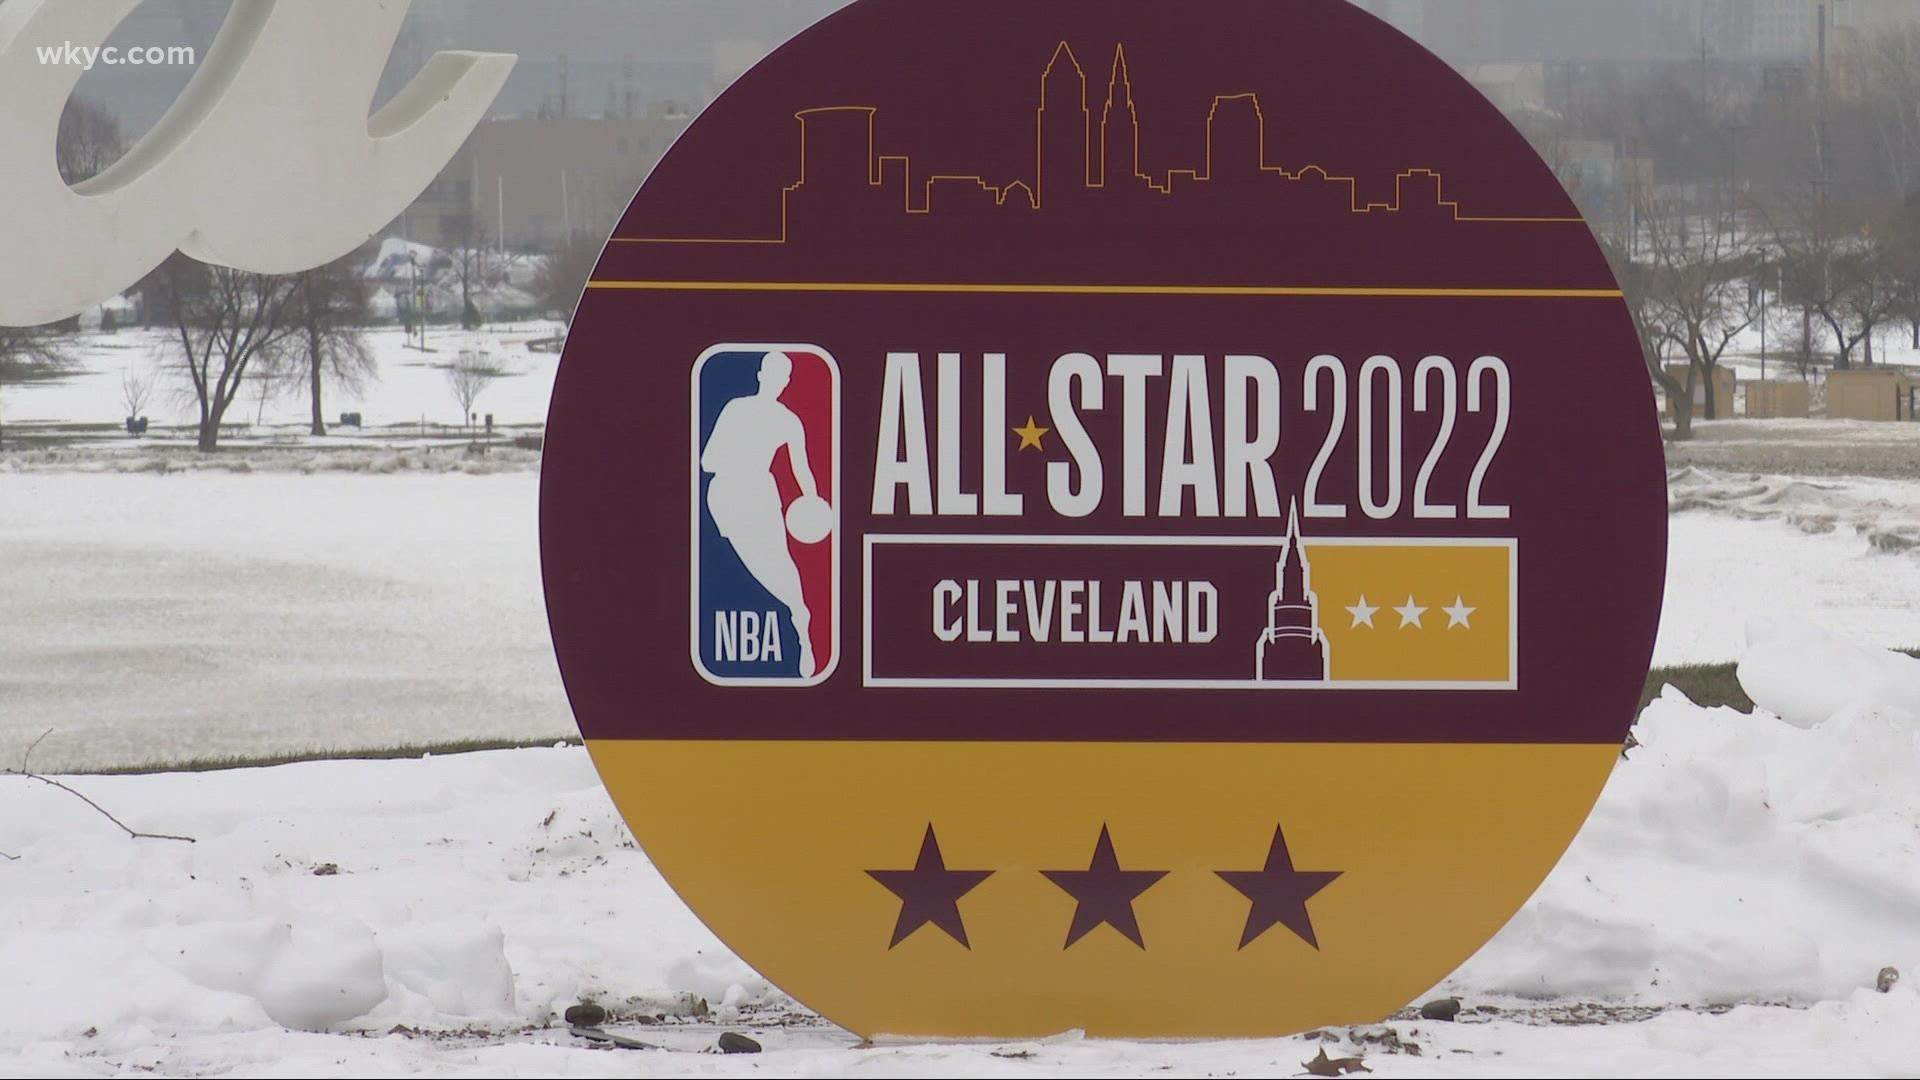 The Script Cleveland signs around Cleveland now feature logos for the 2022 NBA All-Star Game.